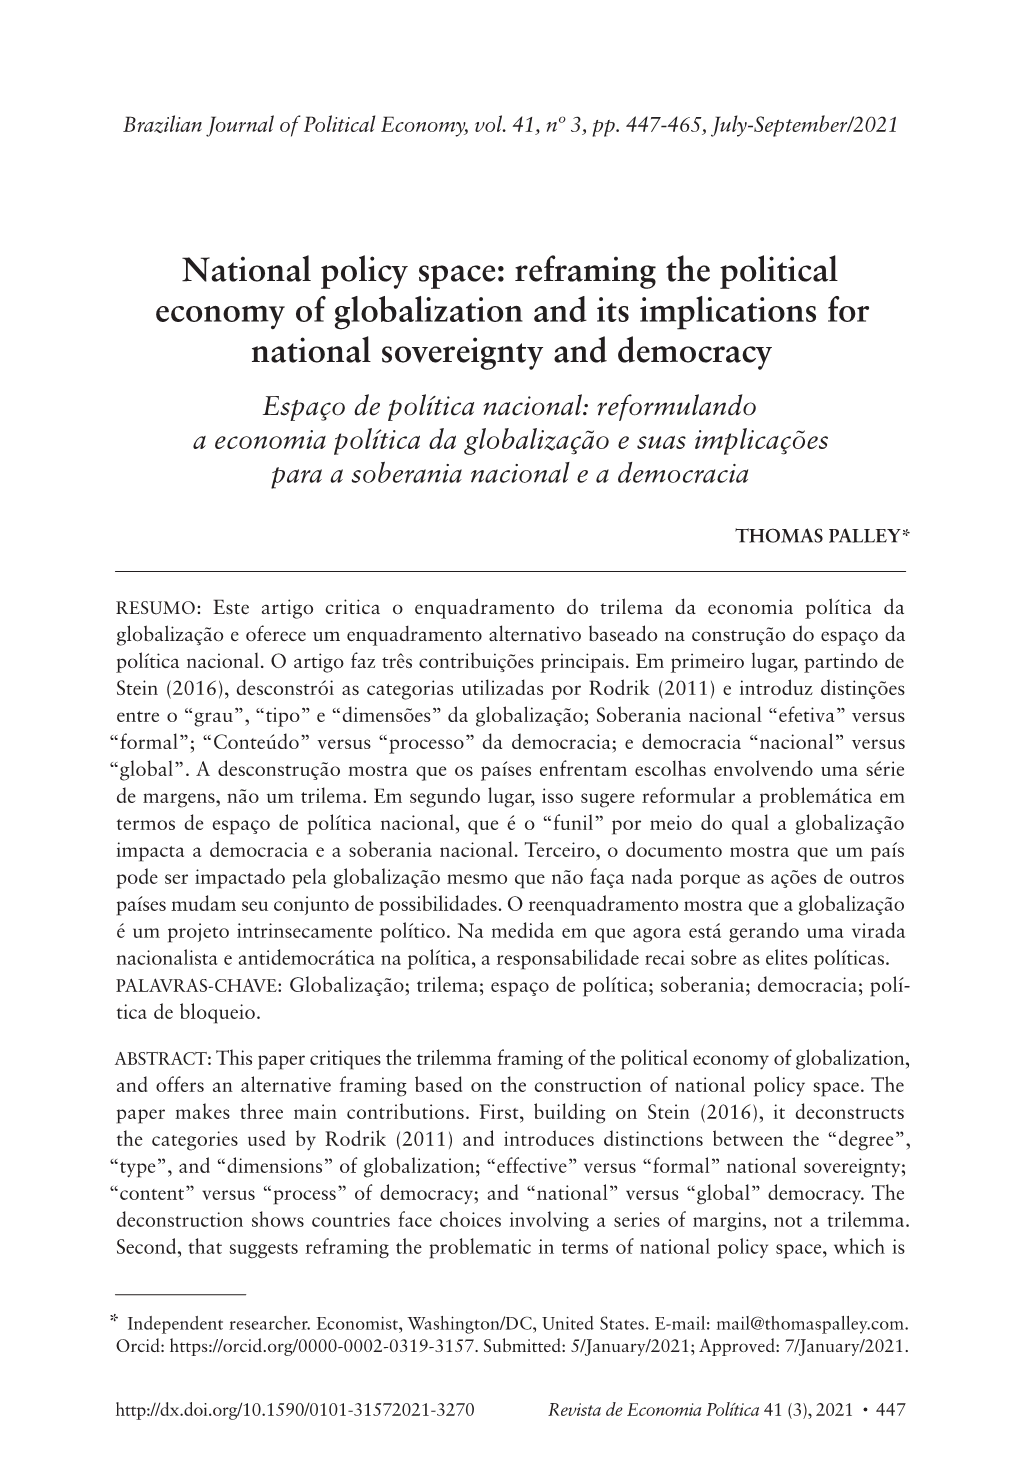 National Policy Space: Reframing the Political Economy of Globalization